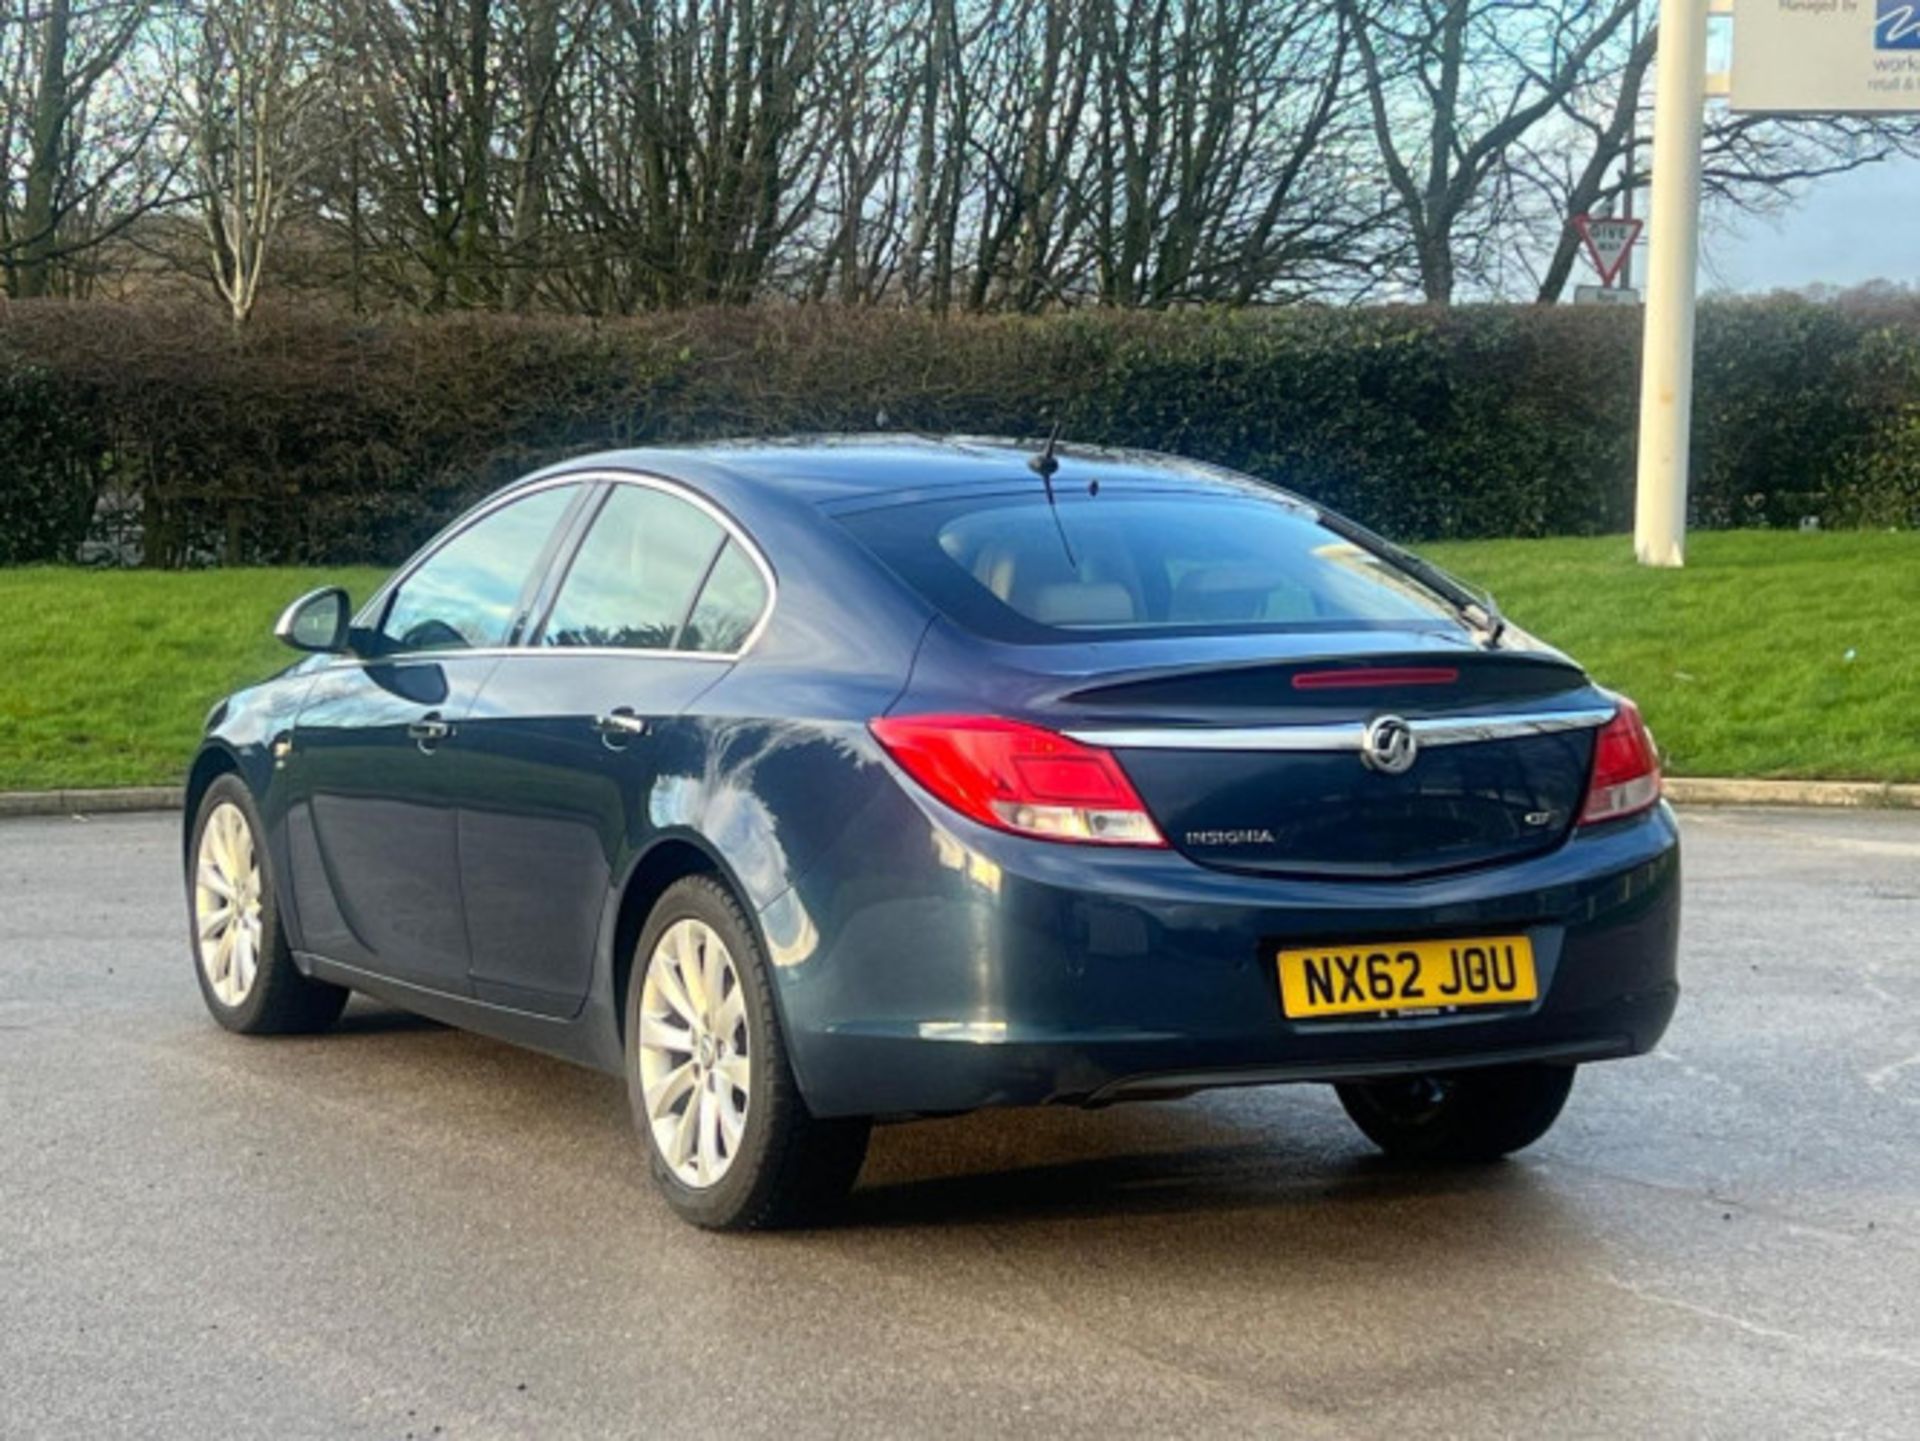 2012 VAUXHALL INSIGNIA 2.0 CDTI ELITE AUTO EURO 5 - DISCOVER EXCELLENCE >>--NO VAT ON HAMMER--<< - Image 114 of 120